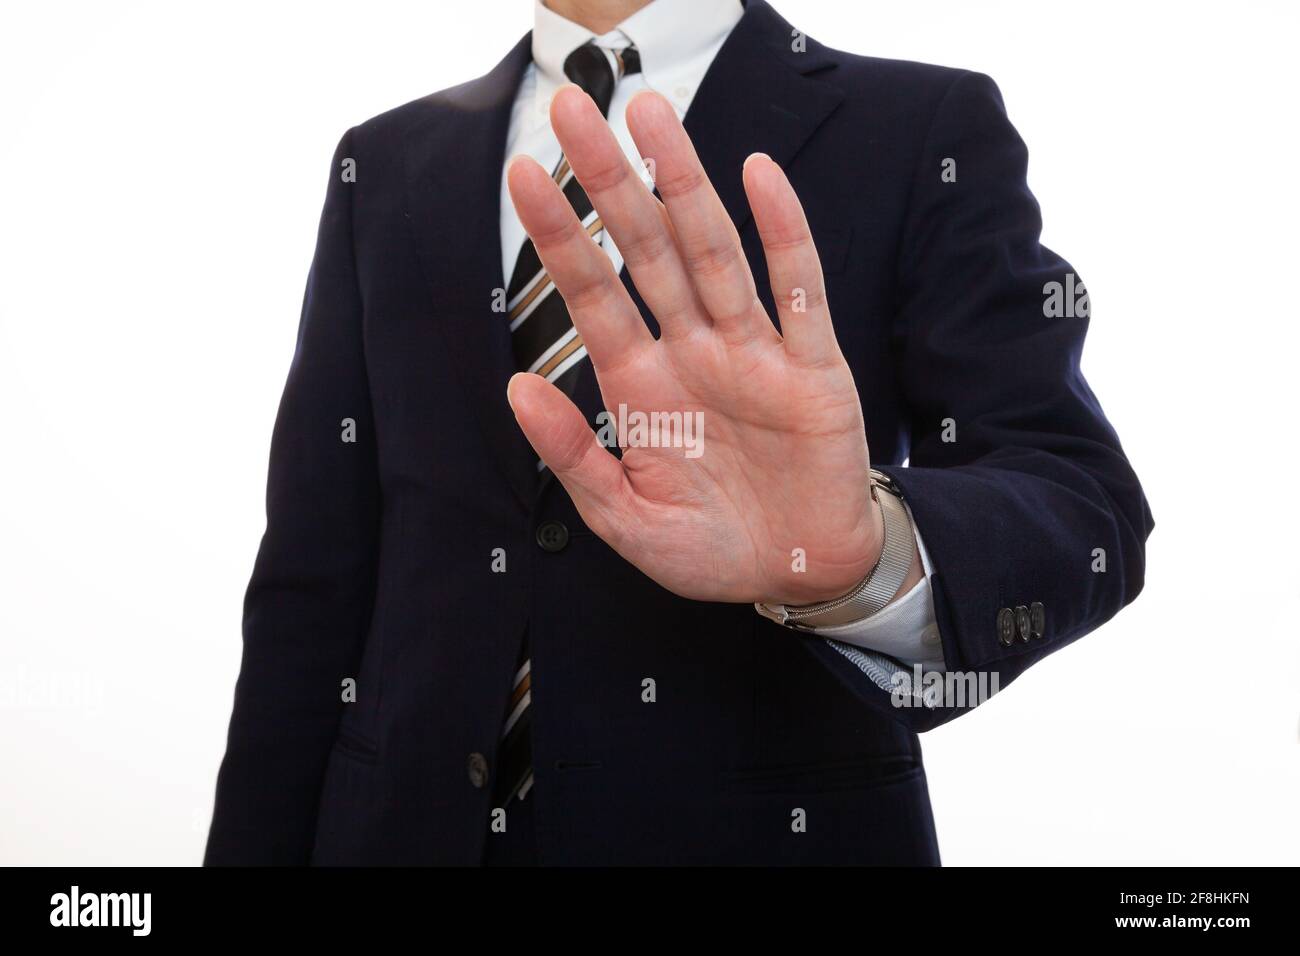 Man in a suit giving a ban, stop hand sign Stock Photo